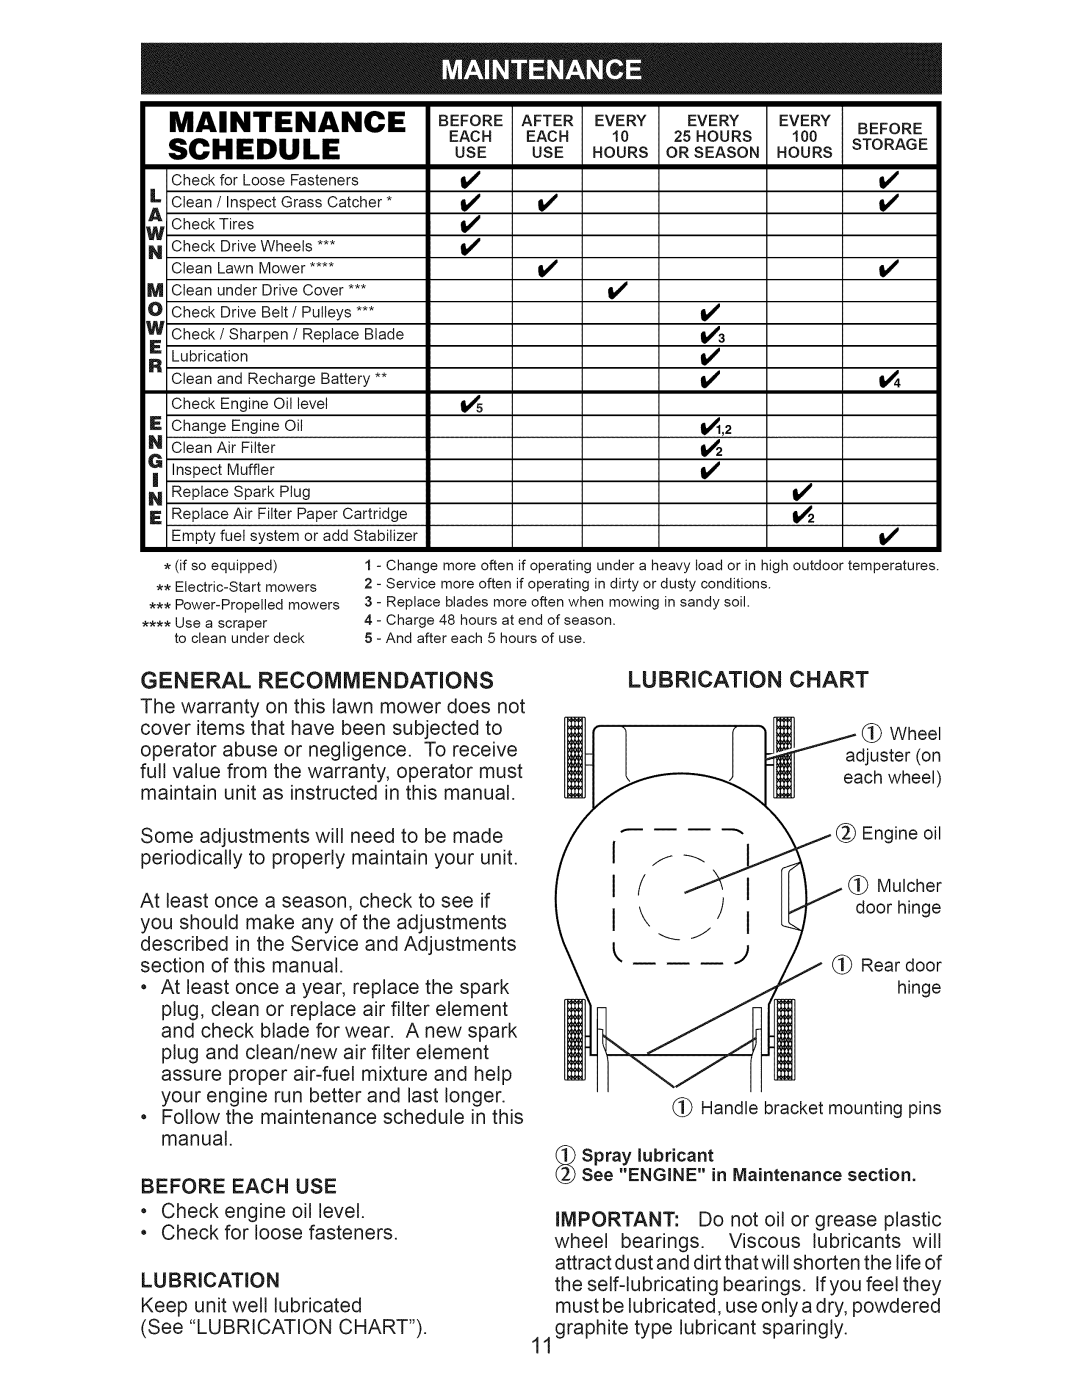 Craftsman 917.389050 owner manual Maintenance, Schedule, Use Hours 